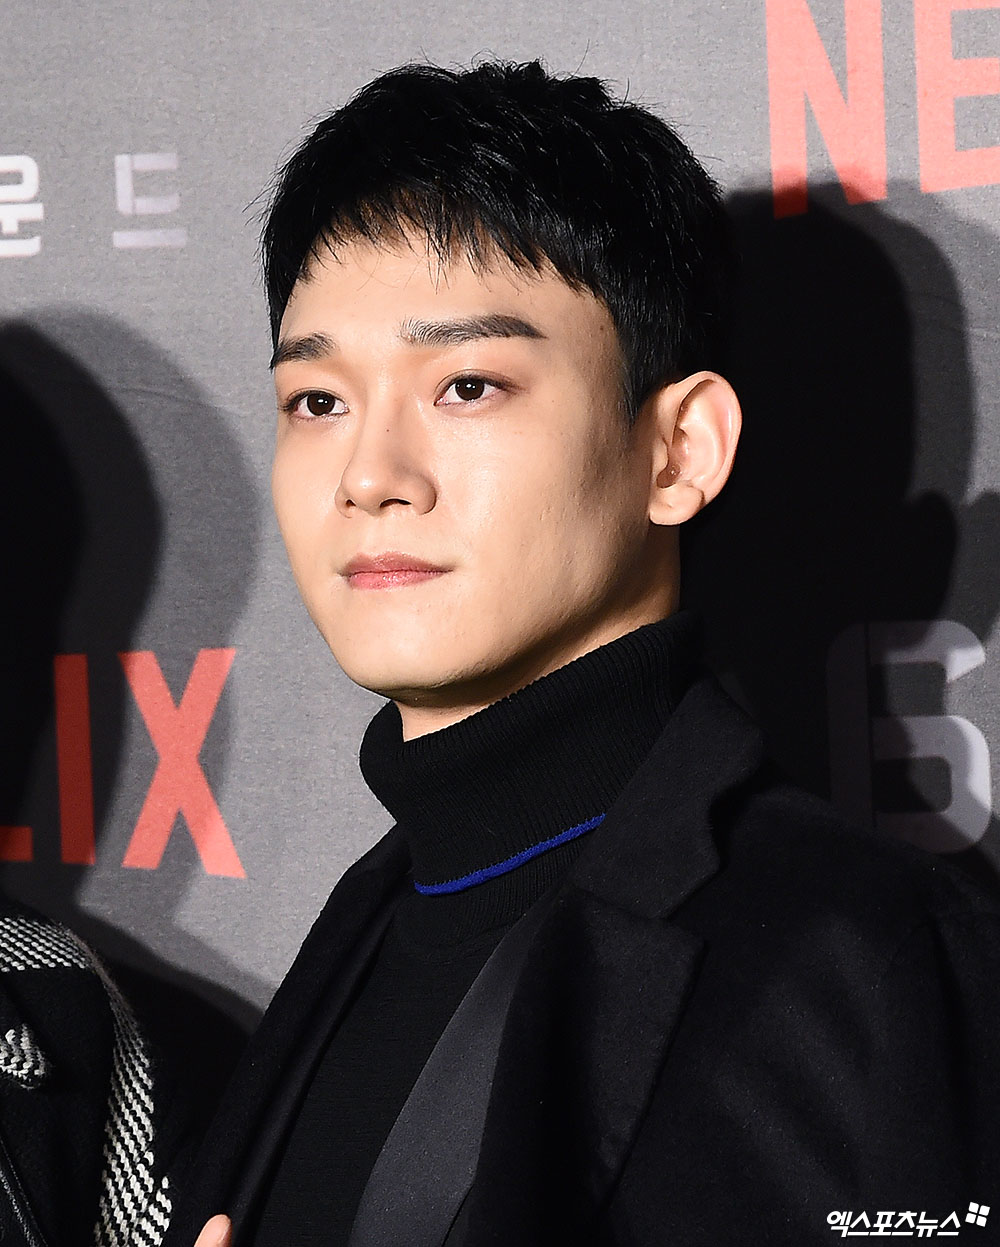 EXO Chen posts marriage ceremony with non-entertainment womanChen will continue to work hard as the artist, he said. I would like to ask Chen to give me many blessings and congratulations.Prior to the announcement of the Official Announce, Chen posted a handwritten letter to the official fan club community Lysn and informed fans of the marriage first.Chen said: Theres a GFriend who wants to be with you for the rest of his life.I wanted to communicate with the company and consult with the members so that I would not be surprised by the sudden news. In the meantime, blessings came to me.I was very encouraged to care because I could not delay my time anymore while worrying about when and how to tell you, he added. I am deeply grateful to all the fans who are so grateful to the members who have congratulated me and have been so grateful to me.Finally, Chen concluded the letter, I will always show you my gratitude, always doing my best in my place, and returning the love you sent me.Next is the official position of SM EntertainmentHello, this is SM Entertainment.Chen met a precious relationship and became marriage.The bride is a non-entertainer, and the marriage ceremony is planned to be held reverently by only the families of both families.In the future, Chen will reward him with his constant hard work as The Artist.I ask Chen to give me many blessings and congratulations.Thank you.Heres a specialization in Chens handwritten lettersHi, Im ChenI have something to tell you fans, so I wrote this.I am very nervous and nervous about how to start talking, but I want to be the first to tell the fans who gave me so much love.I have a GFriend who wants to spend my whole life together.I was worried and worried about what would happen due to this decision, but I wanted to communicate with the company and consult with the members, especially the members who have been together, especially the fans who are proud of me, so that I would not be surprised by the sudden news.Then a blessing came to me.I was very embarrassed because I could not do the parts I planned with the company and the members, but I was more encouraged by this blessing.I was encouraged to care because I could not delay the time anymore while thinking about when and how to tell.I am deeply grateful to the members who have sincerely congratulated me on hearing this news and to the fans who are too grateful and are very loving to me.I will always show you my gratitude, my best in my place, and my return to the love you have sent me.Thank you always.Photo = DB, SM Entertainment